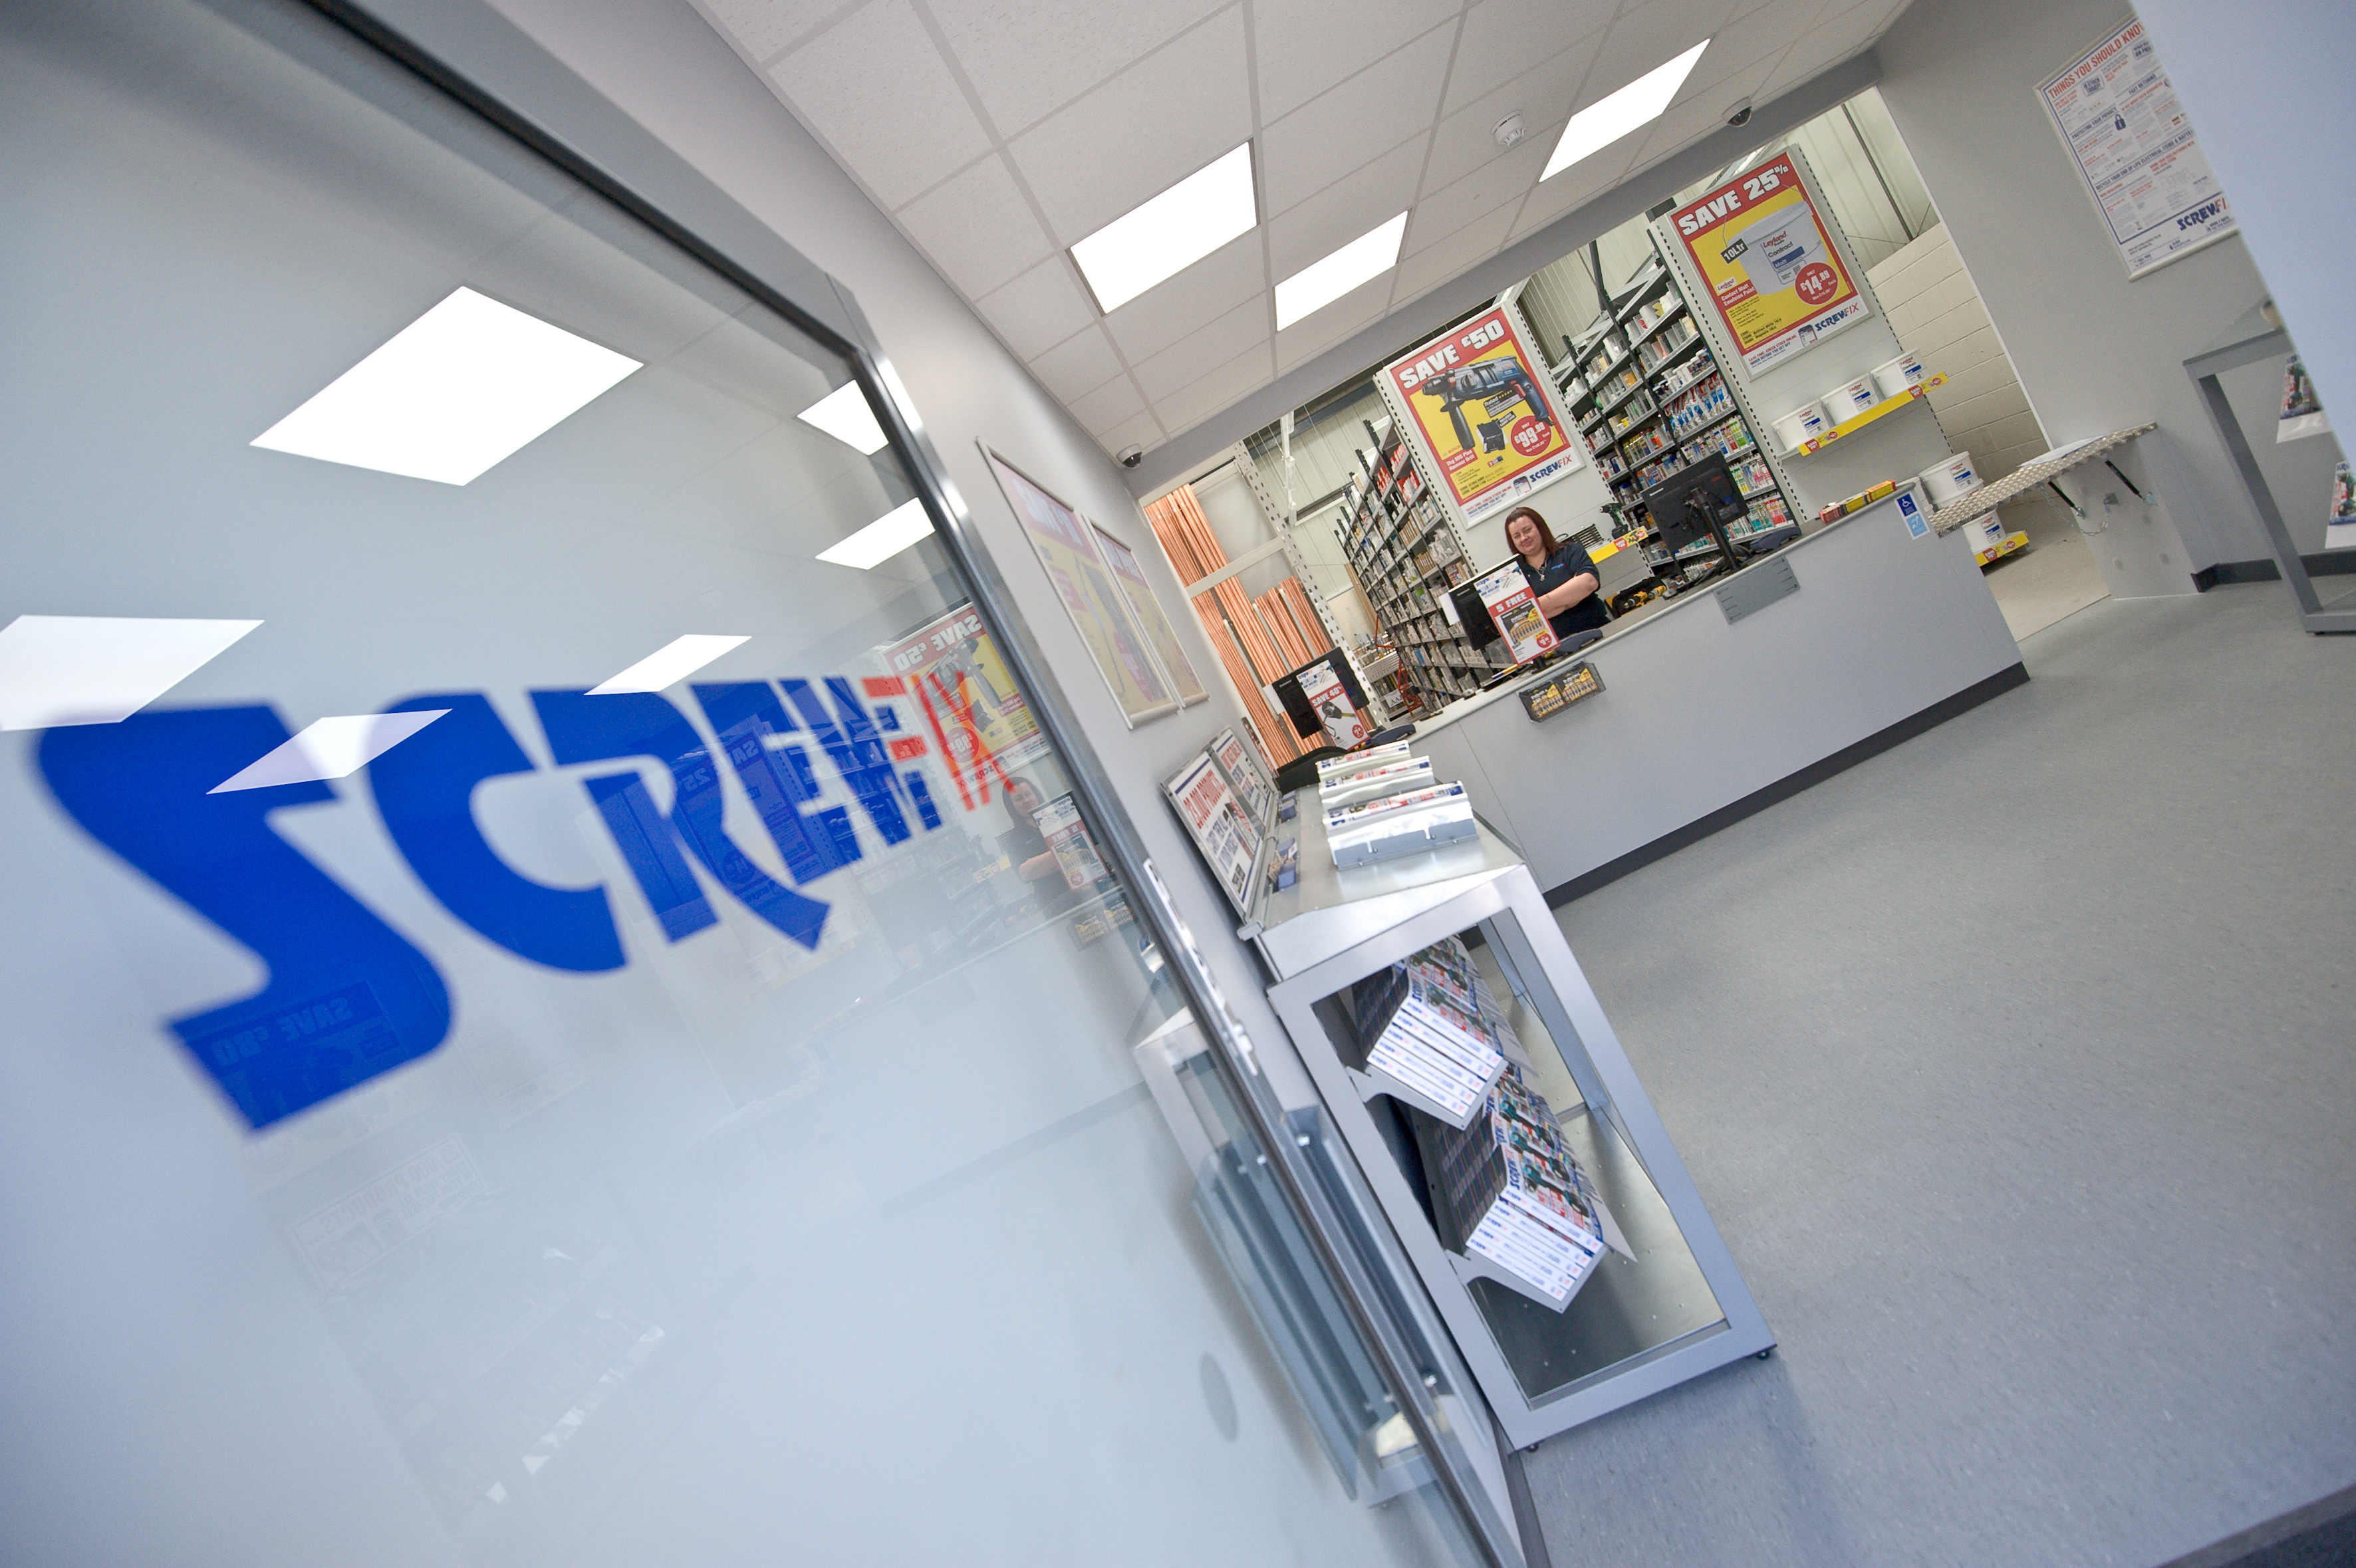 Frome’s first Screwfix store to open on 13 August